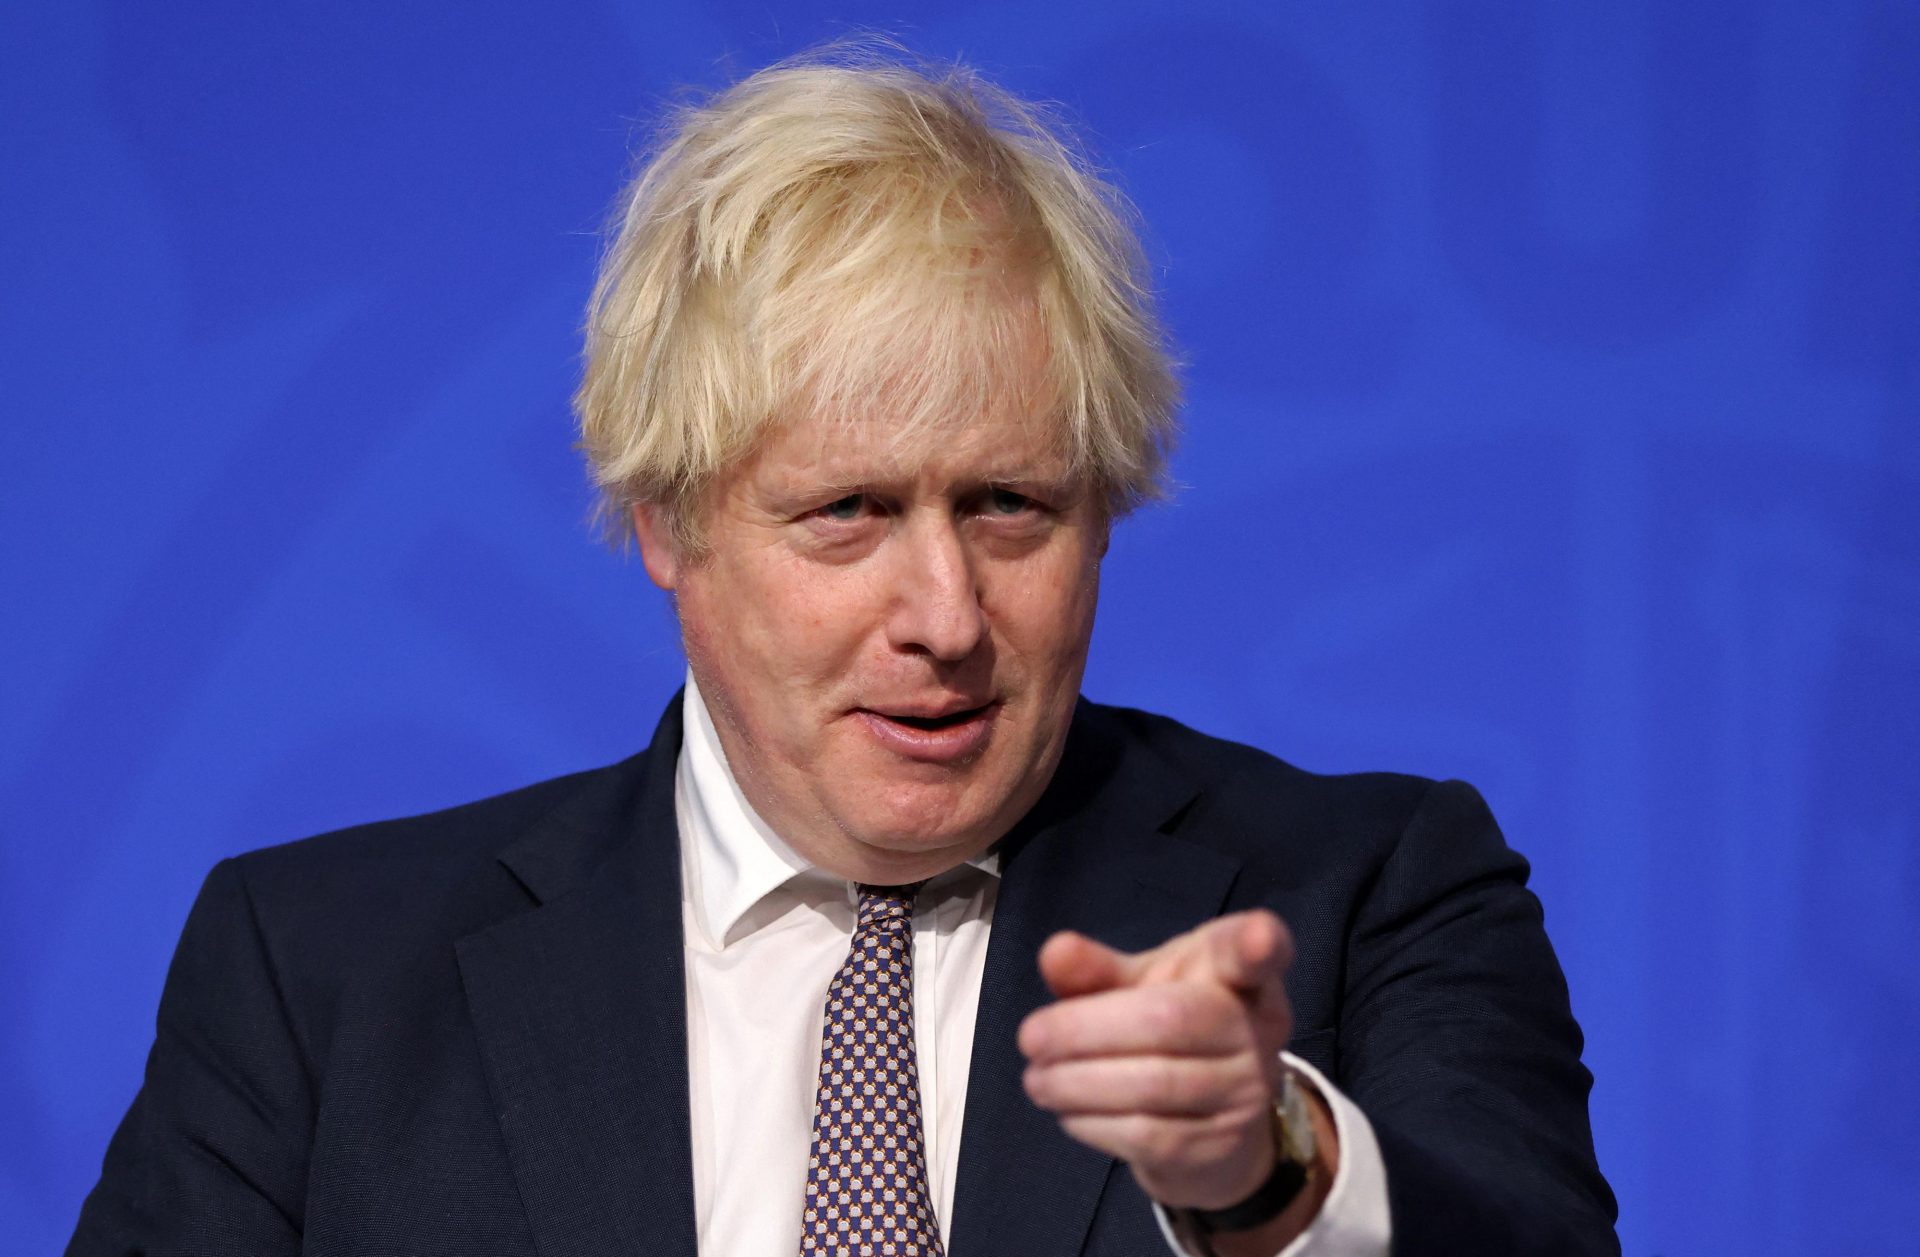 Boris Johnson gestures during his media briefing on the Covid-19 Omicron strain. Photo: Hollie Adams/Pool/AFP via Getty Images